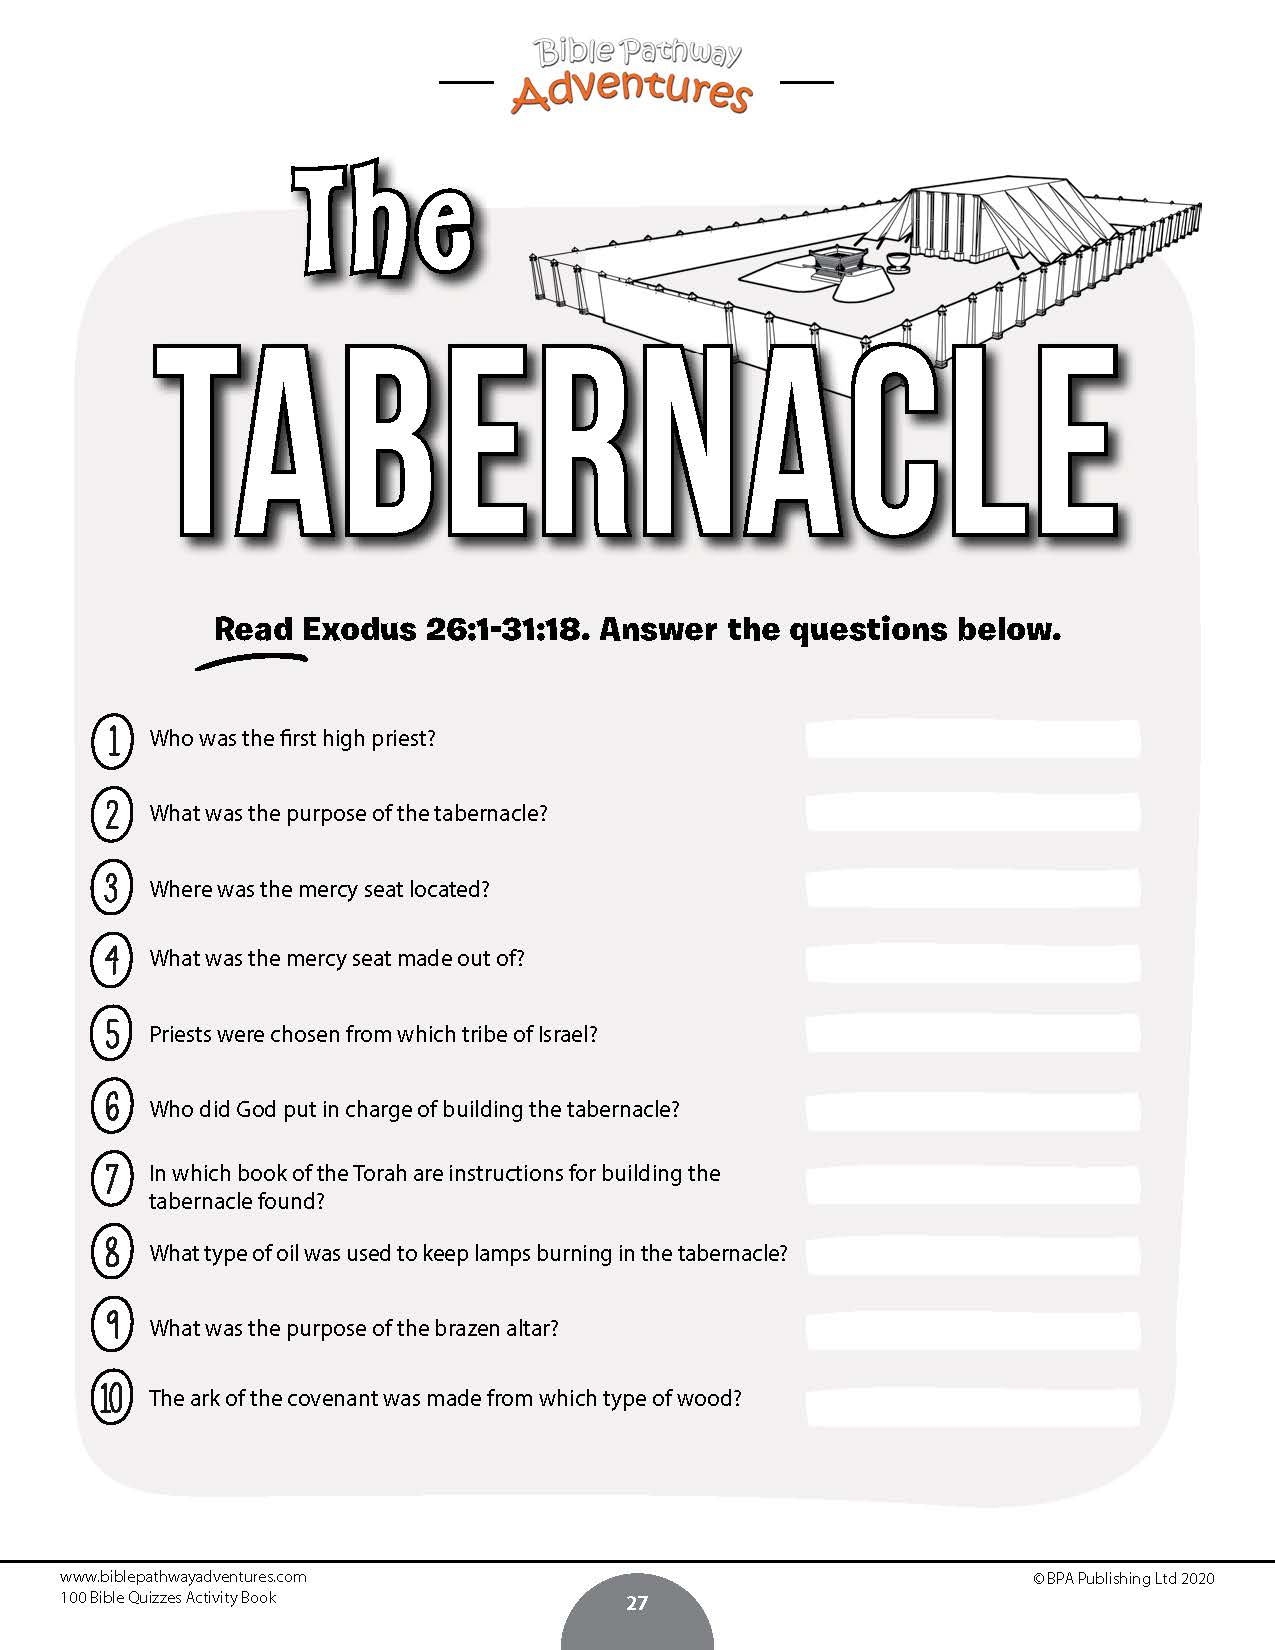 The Tabernacle Bible quiz